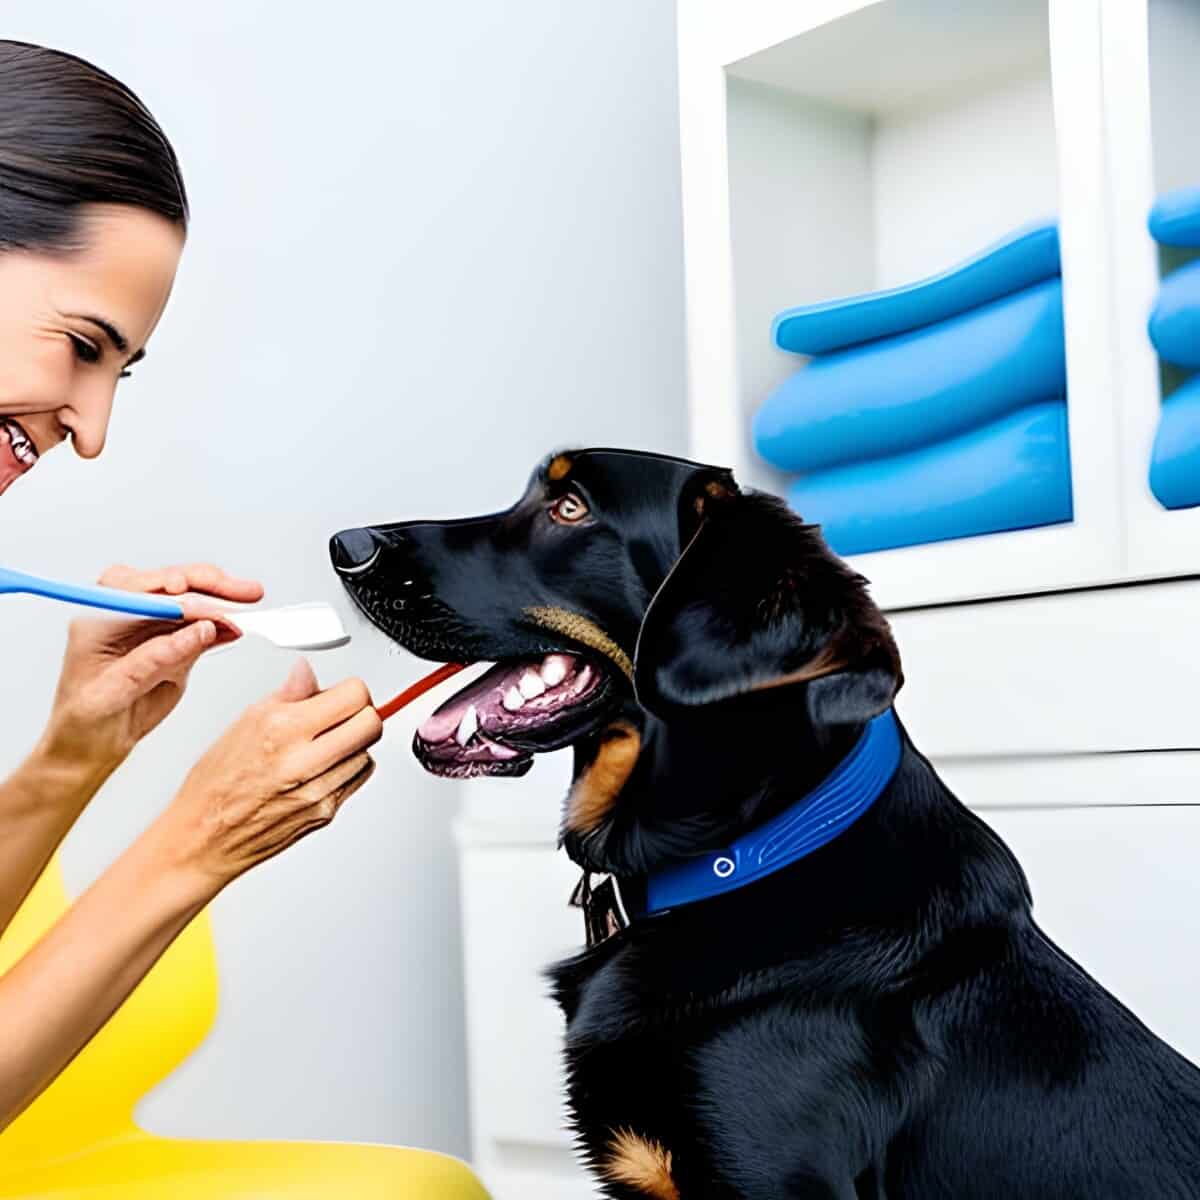 a dog owner is brushing dog teeth. She is showing how to brush dogs teeth